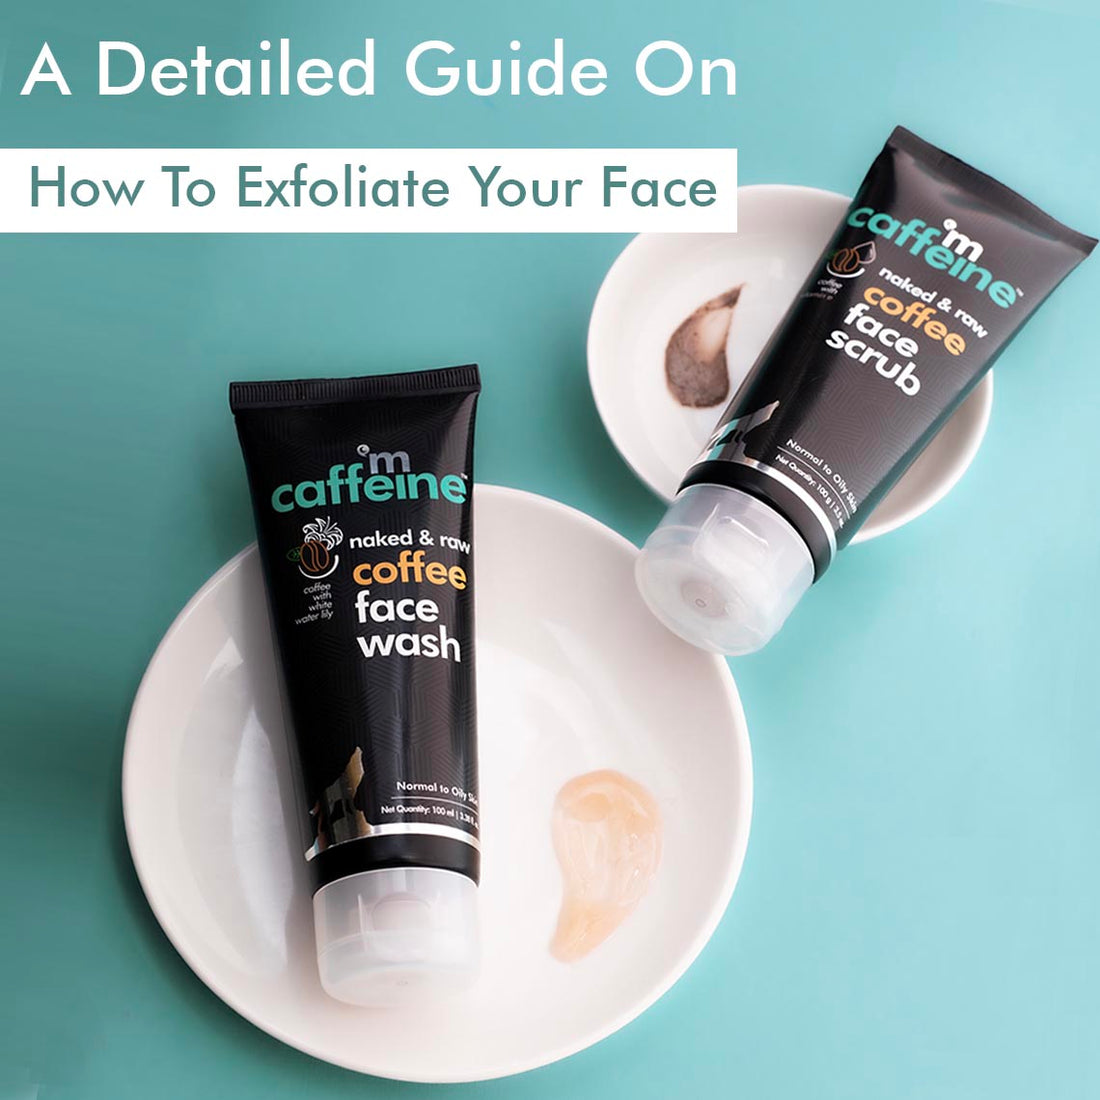 A Detailed Guide on How to Exfoliate Your Face